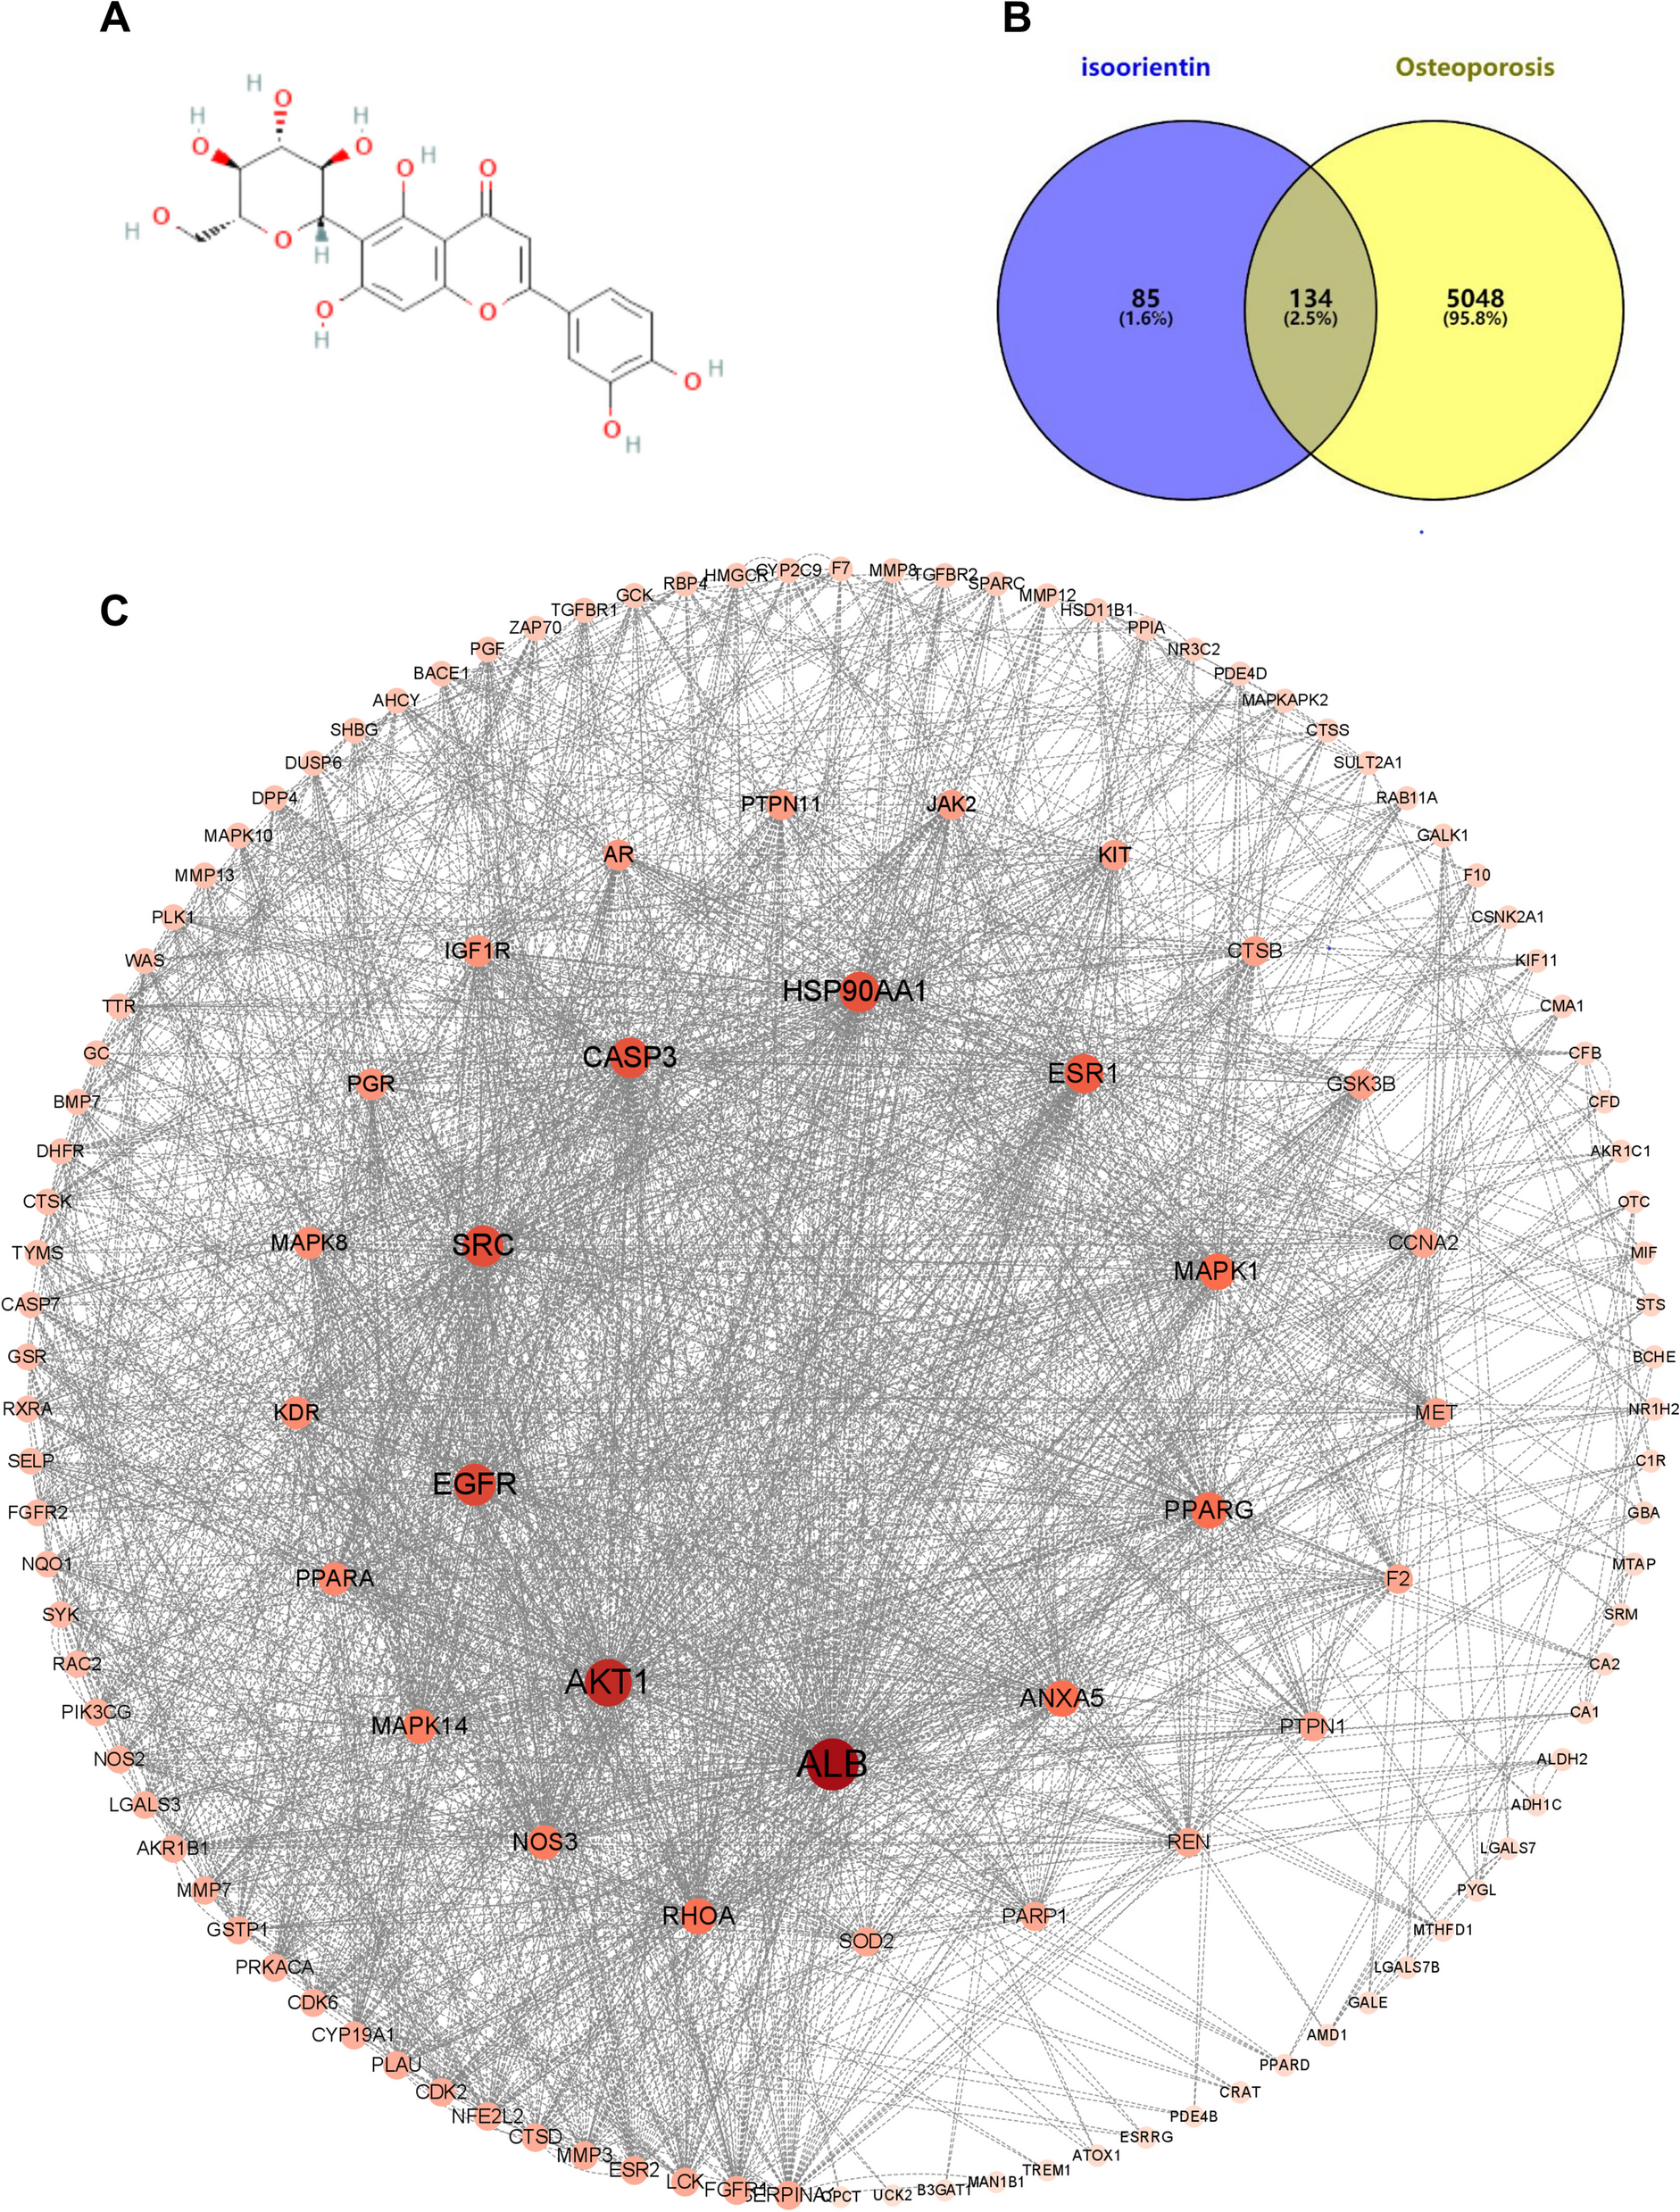 Exploring the therapeutic potential of isoorientin in the treatment of osteoporosis: a study using network pharmacology and experimental validation